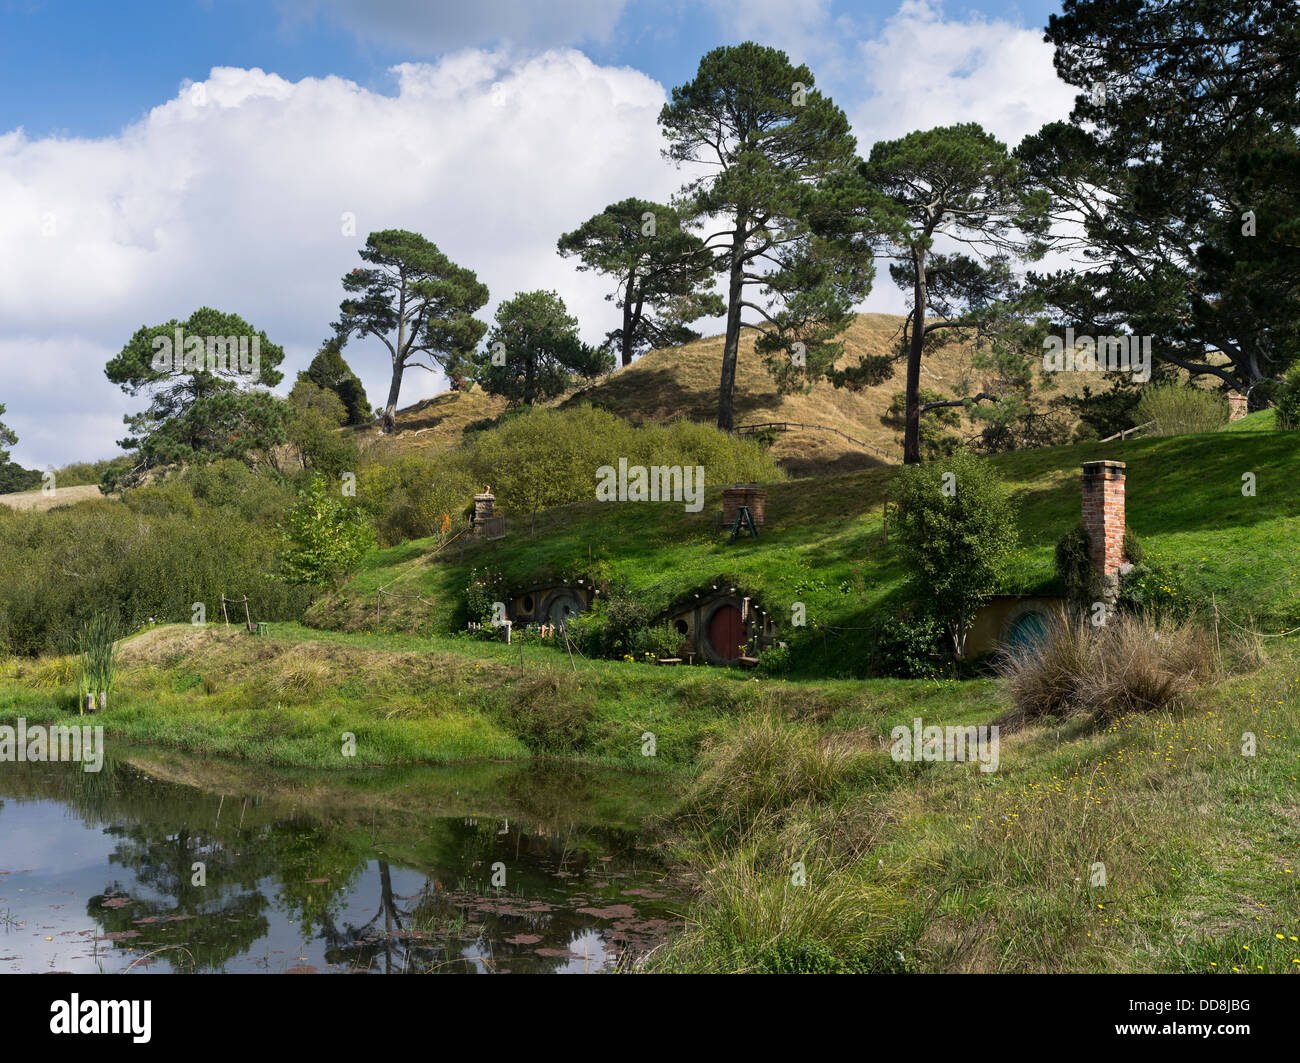 dh Lord of the Rings HOBBITON NEW ZEALAND Hobbits cottage houses set movie site films middle earth house hobbit Stock Photo